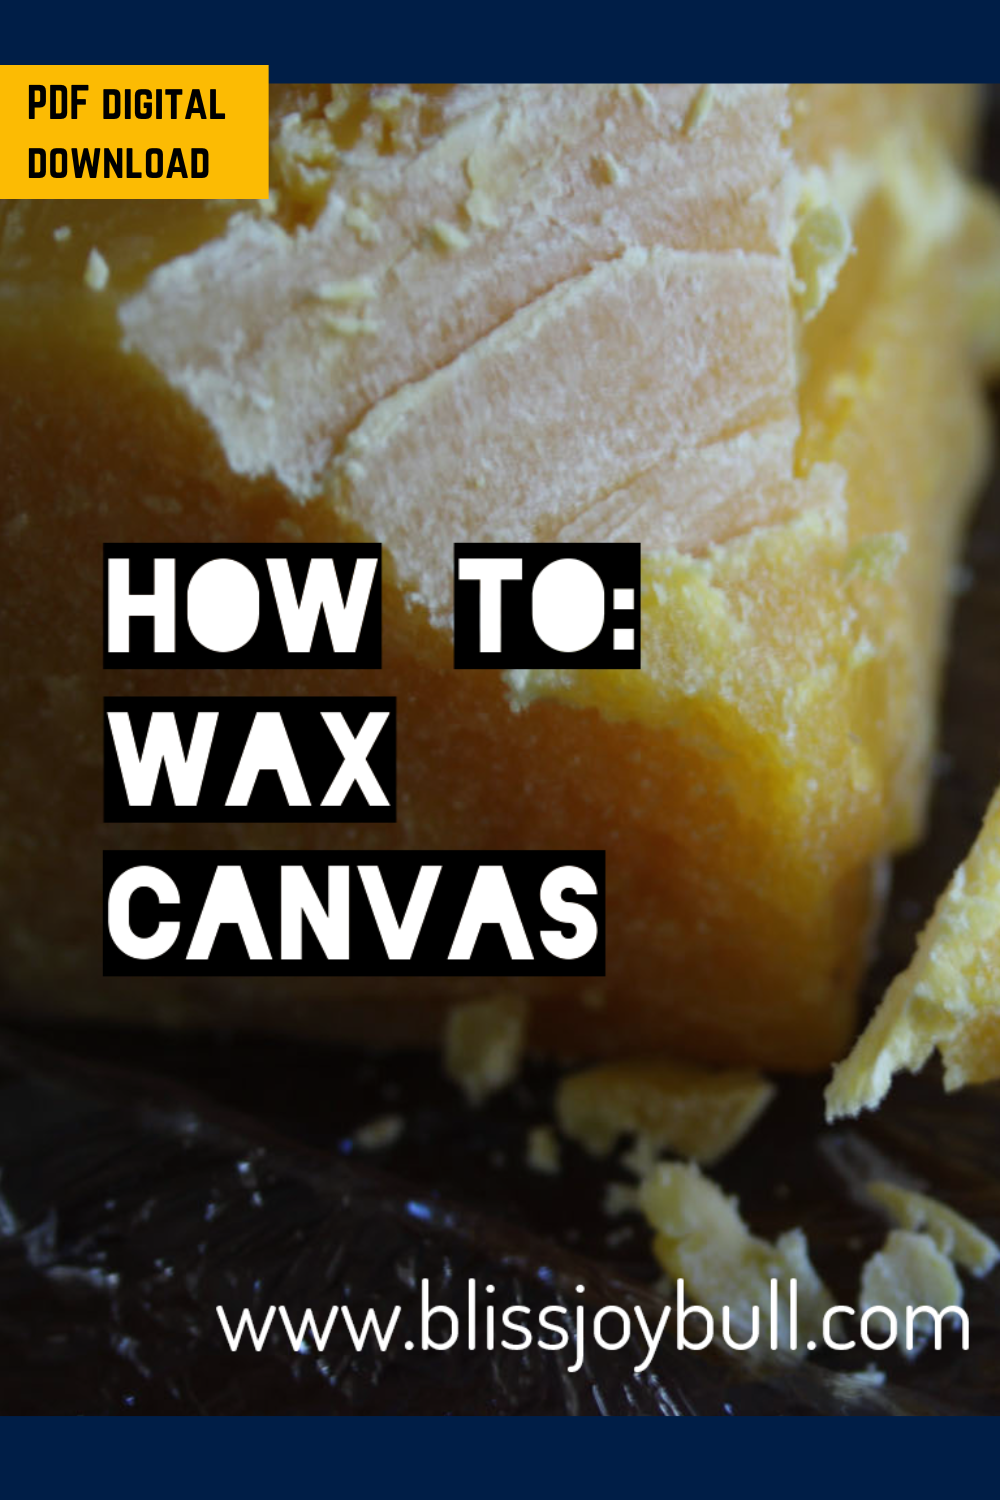 How to Wax Canvas Tutorial - PDF Download